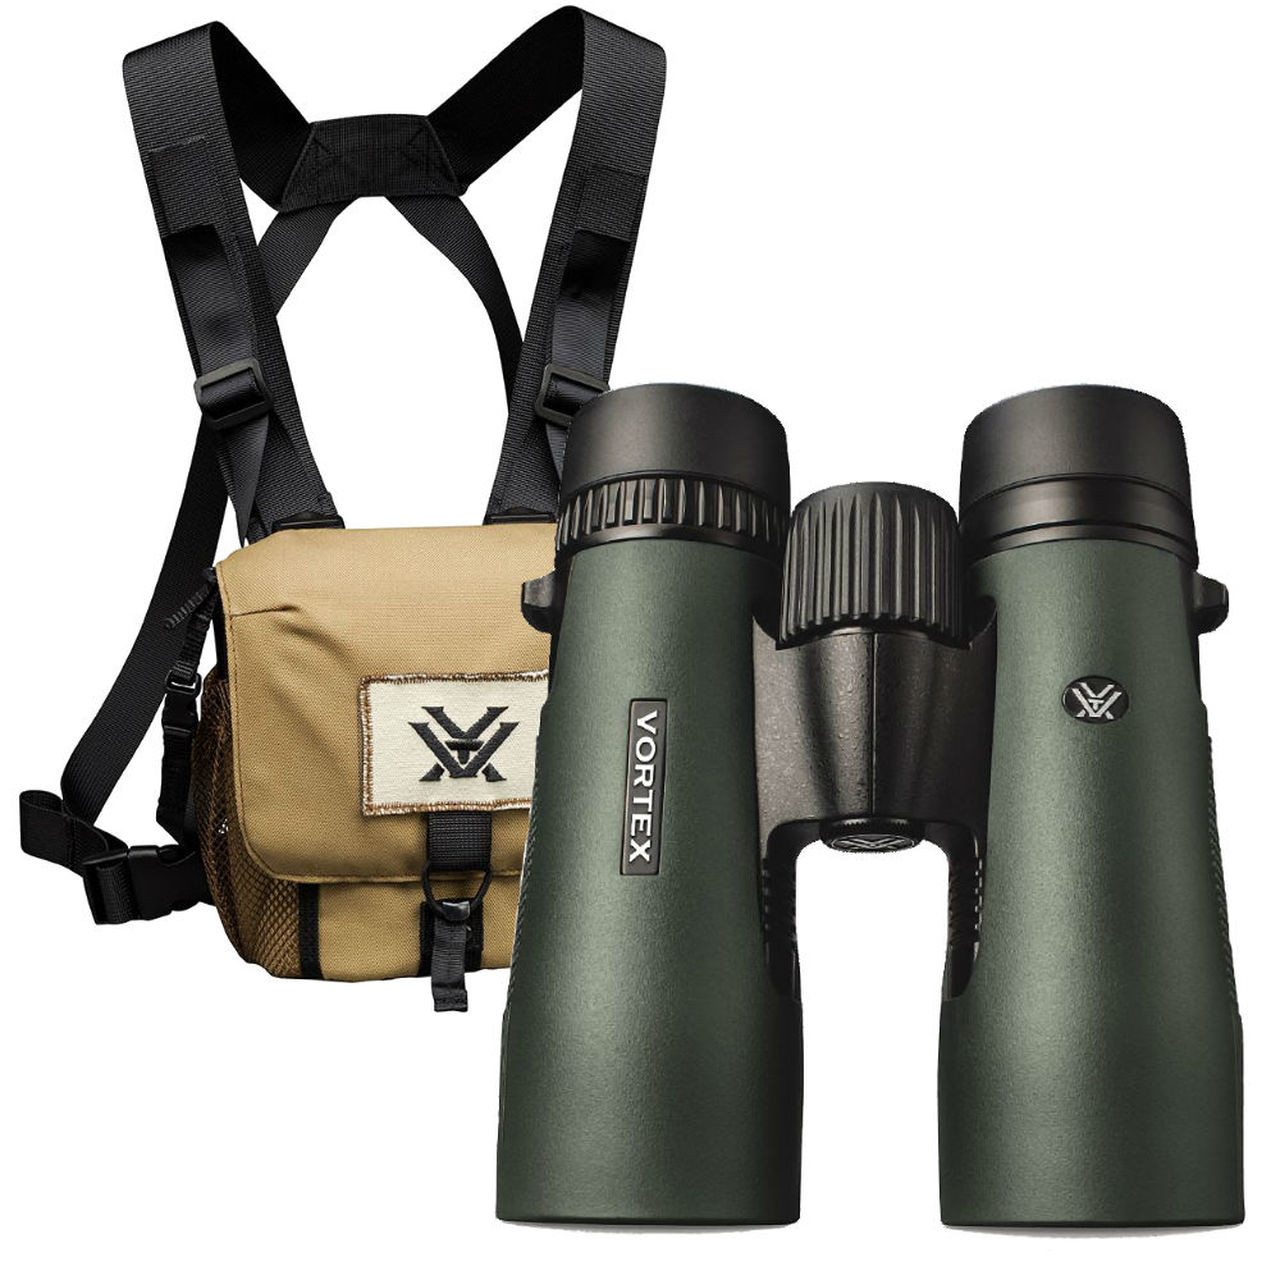 Vortex Diamondback HD 10x50 binocular is breaking new ground in quality and clarity for distance targets. Buy online securely.